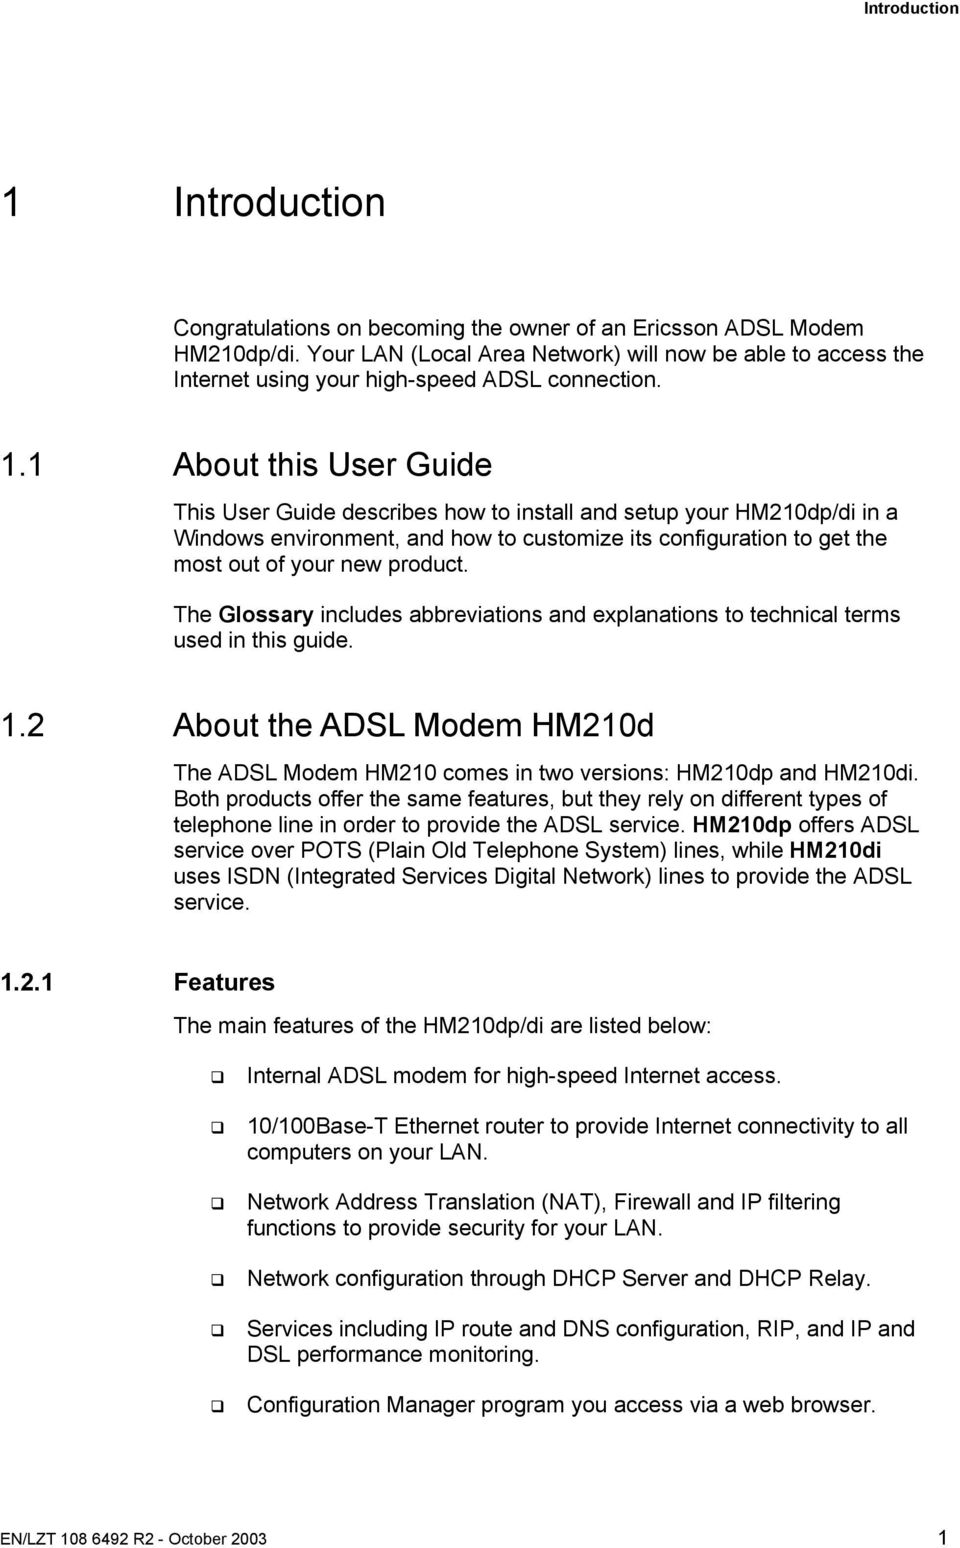 1 About this User Guide This User Guide describes how to install and setup your HM210dp/di in a Windows environment, and how to customize its configuration to get the most out of your new product.